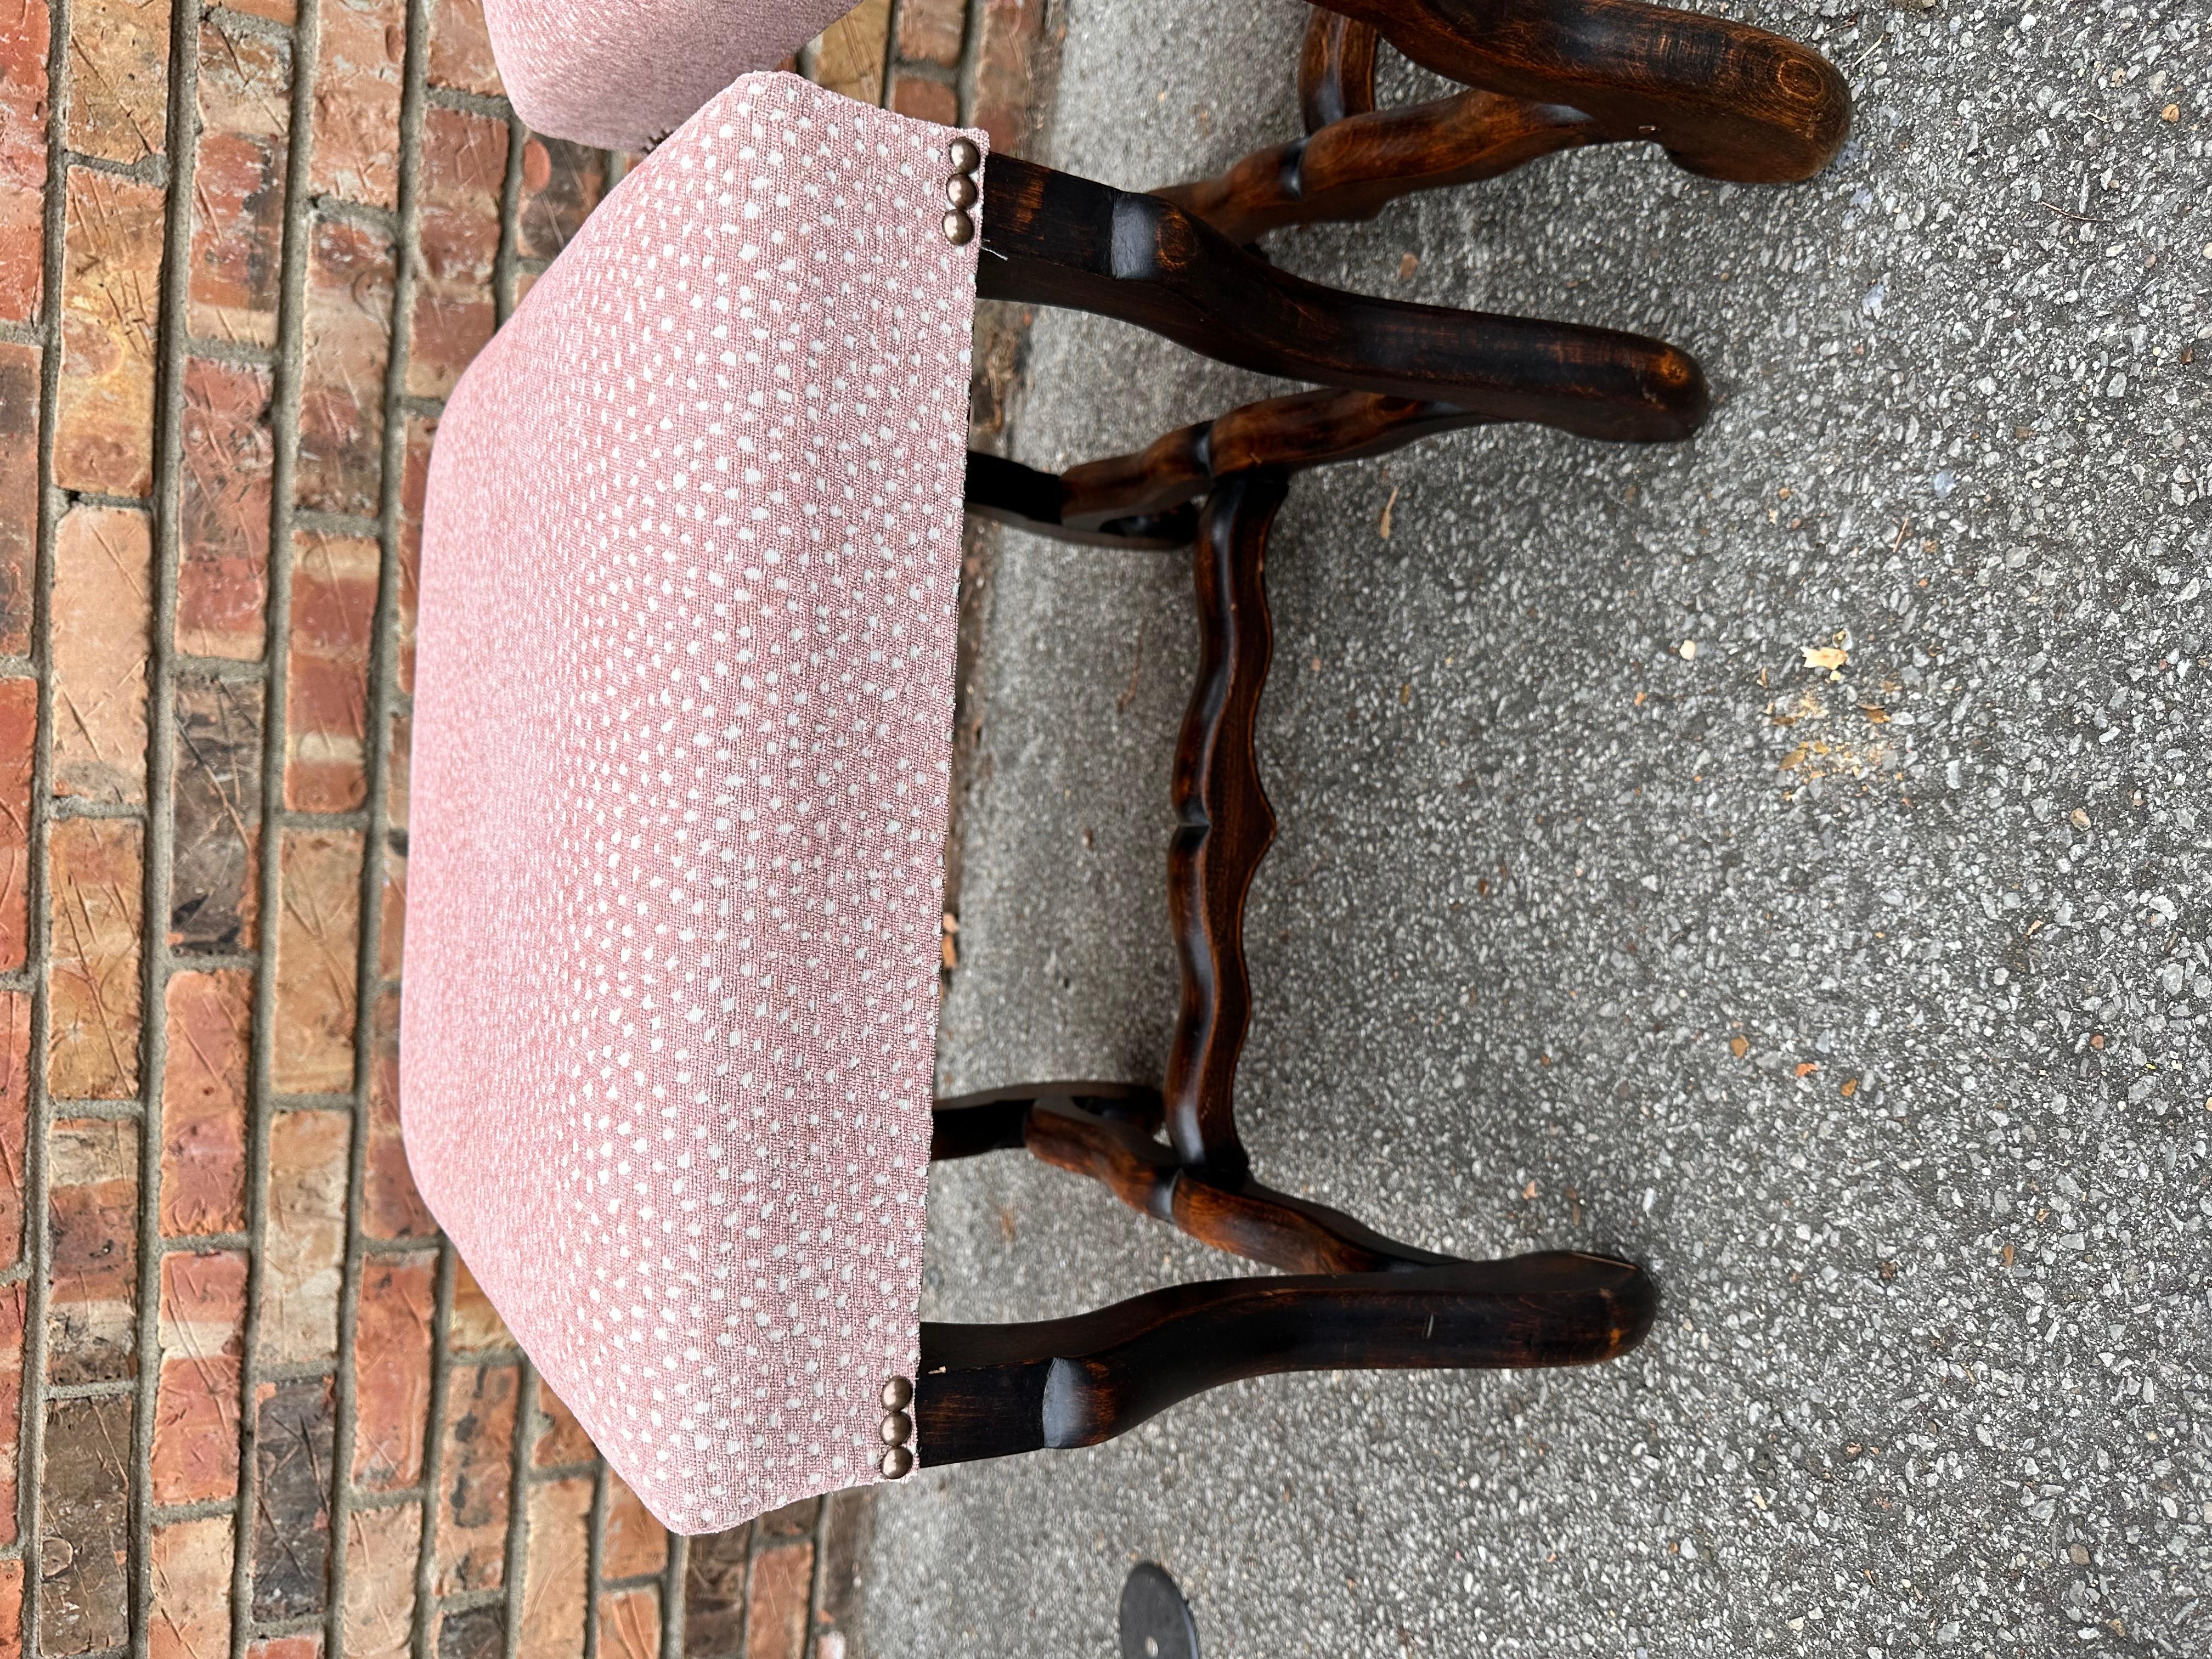 This is such a beautiful set of stools! The frame is an original French antique, with beautiful curves and design. It has been newly upholstered in a fabric that complements it well. The fabric is a soft pint polkadot design that can add color